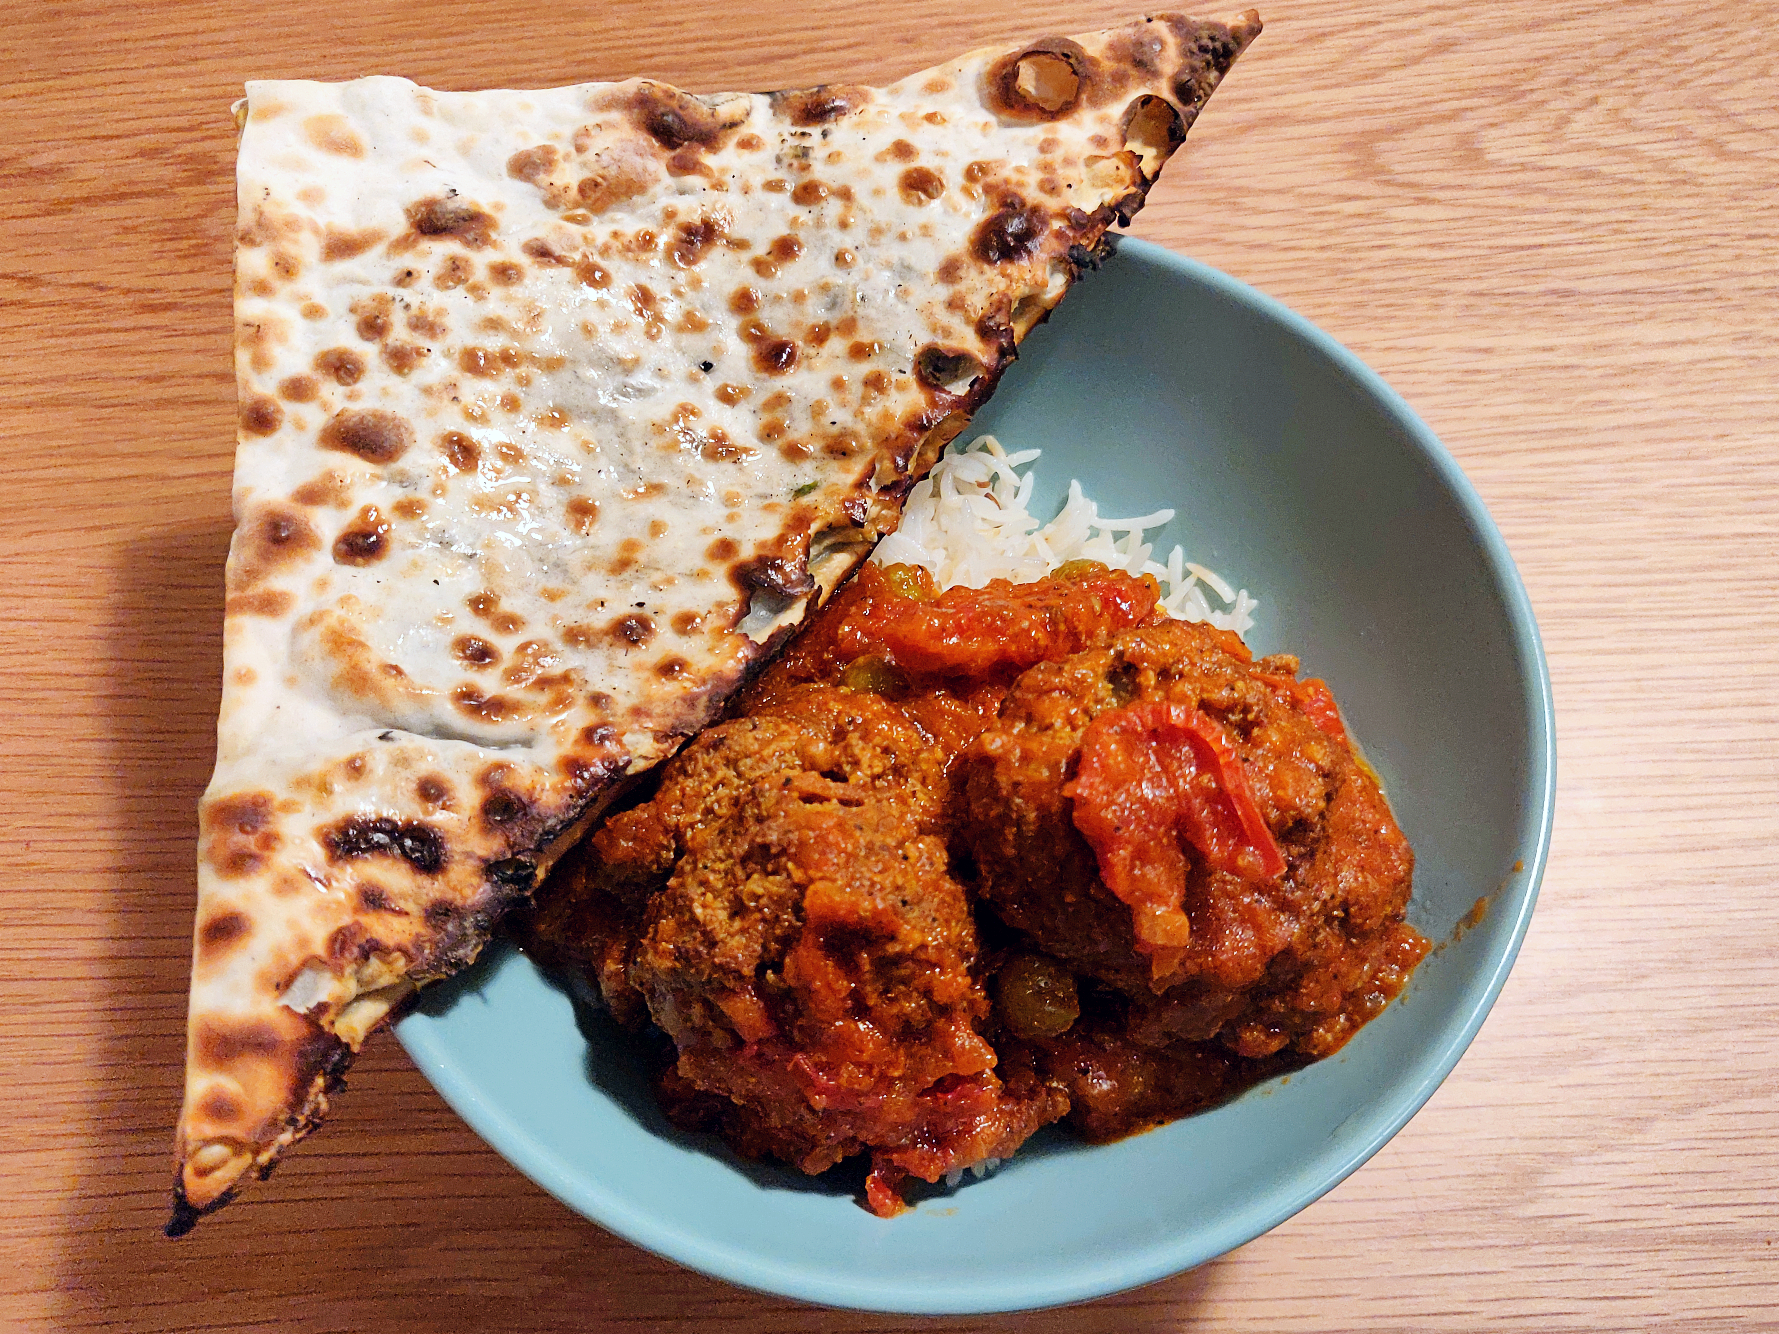 Two plump meatballs in red sauce sit on a bed of white rice, with a thin, crispy triangle of flatbread on the side.